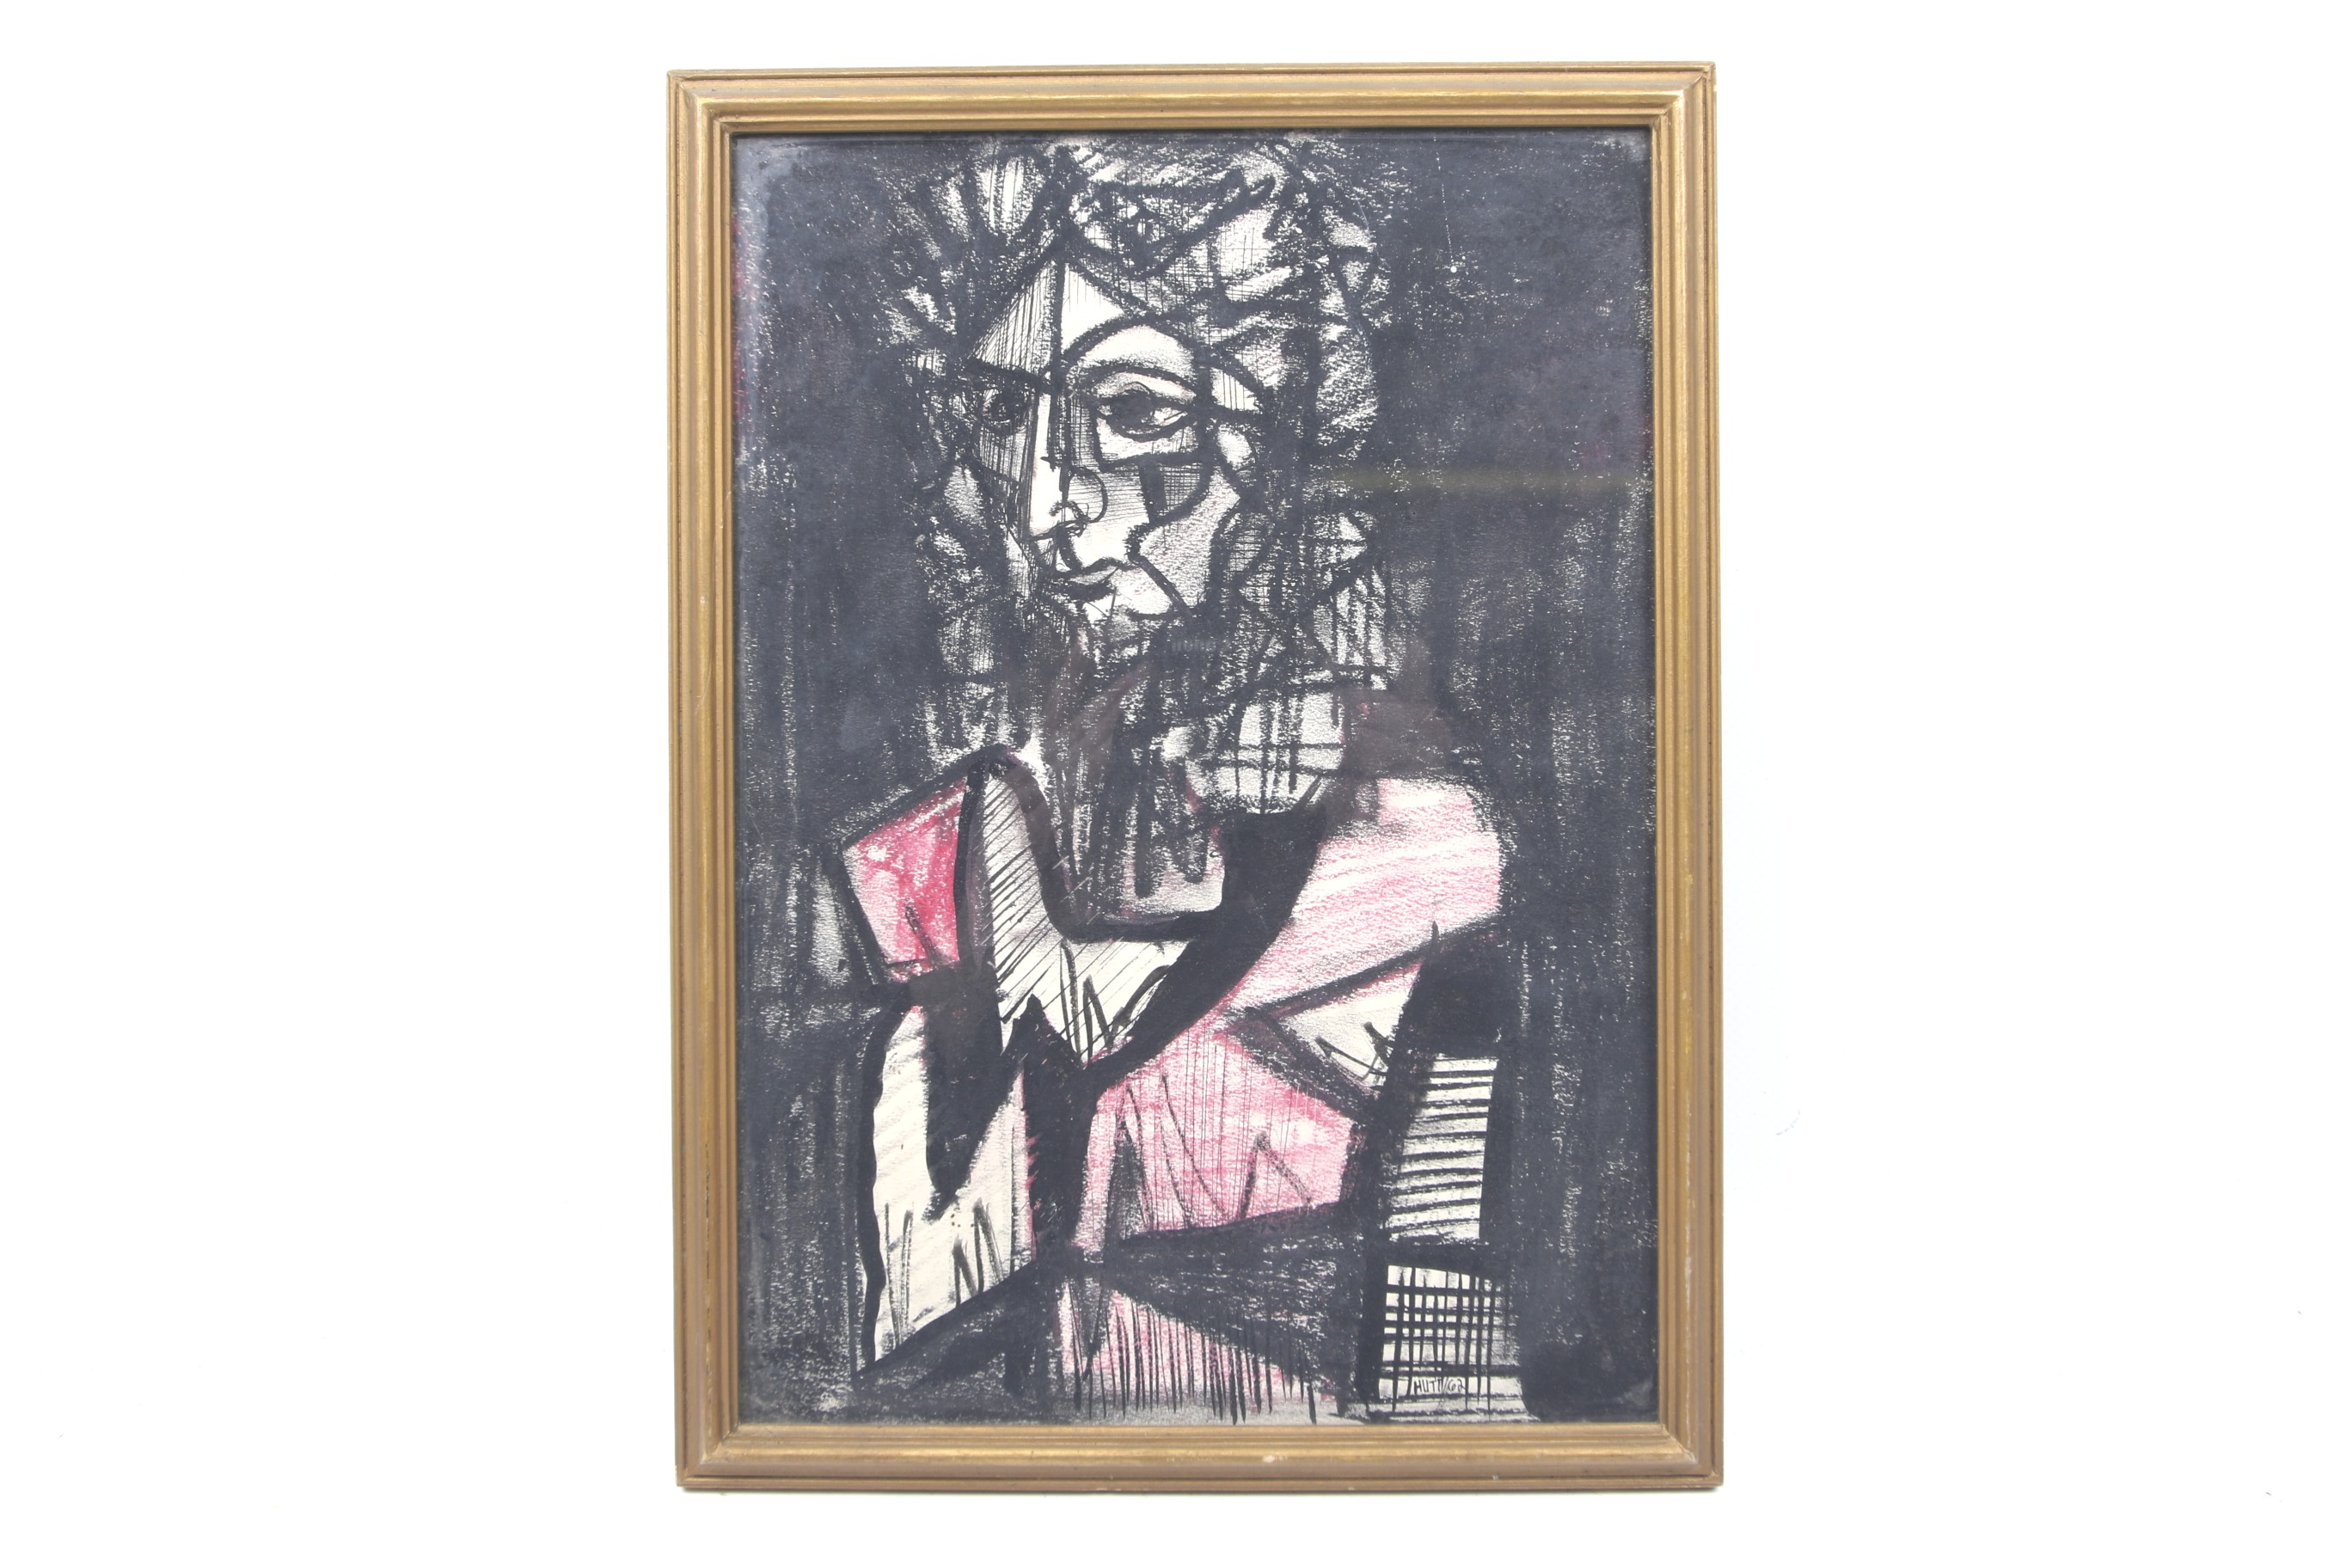 Hutt (20th century) pen and pastel, portrait of a figure. - Image 2 of 2